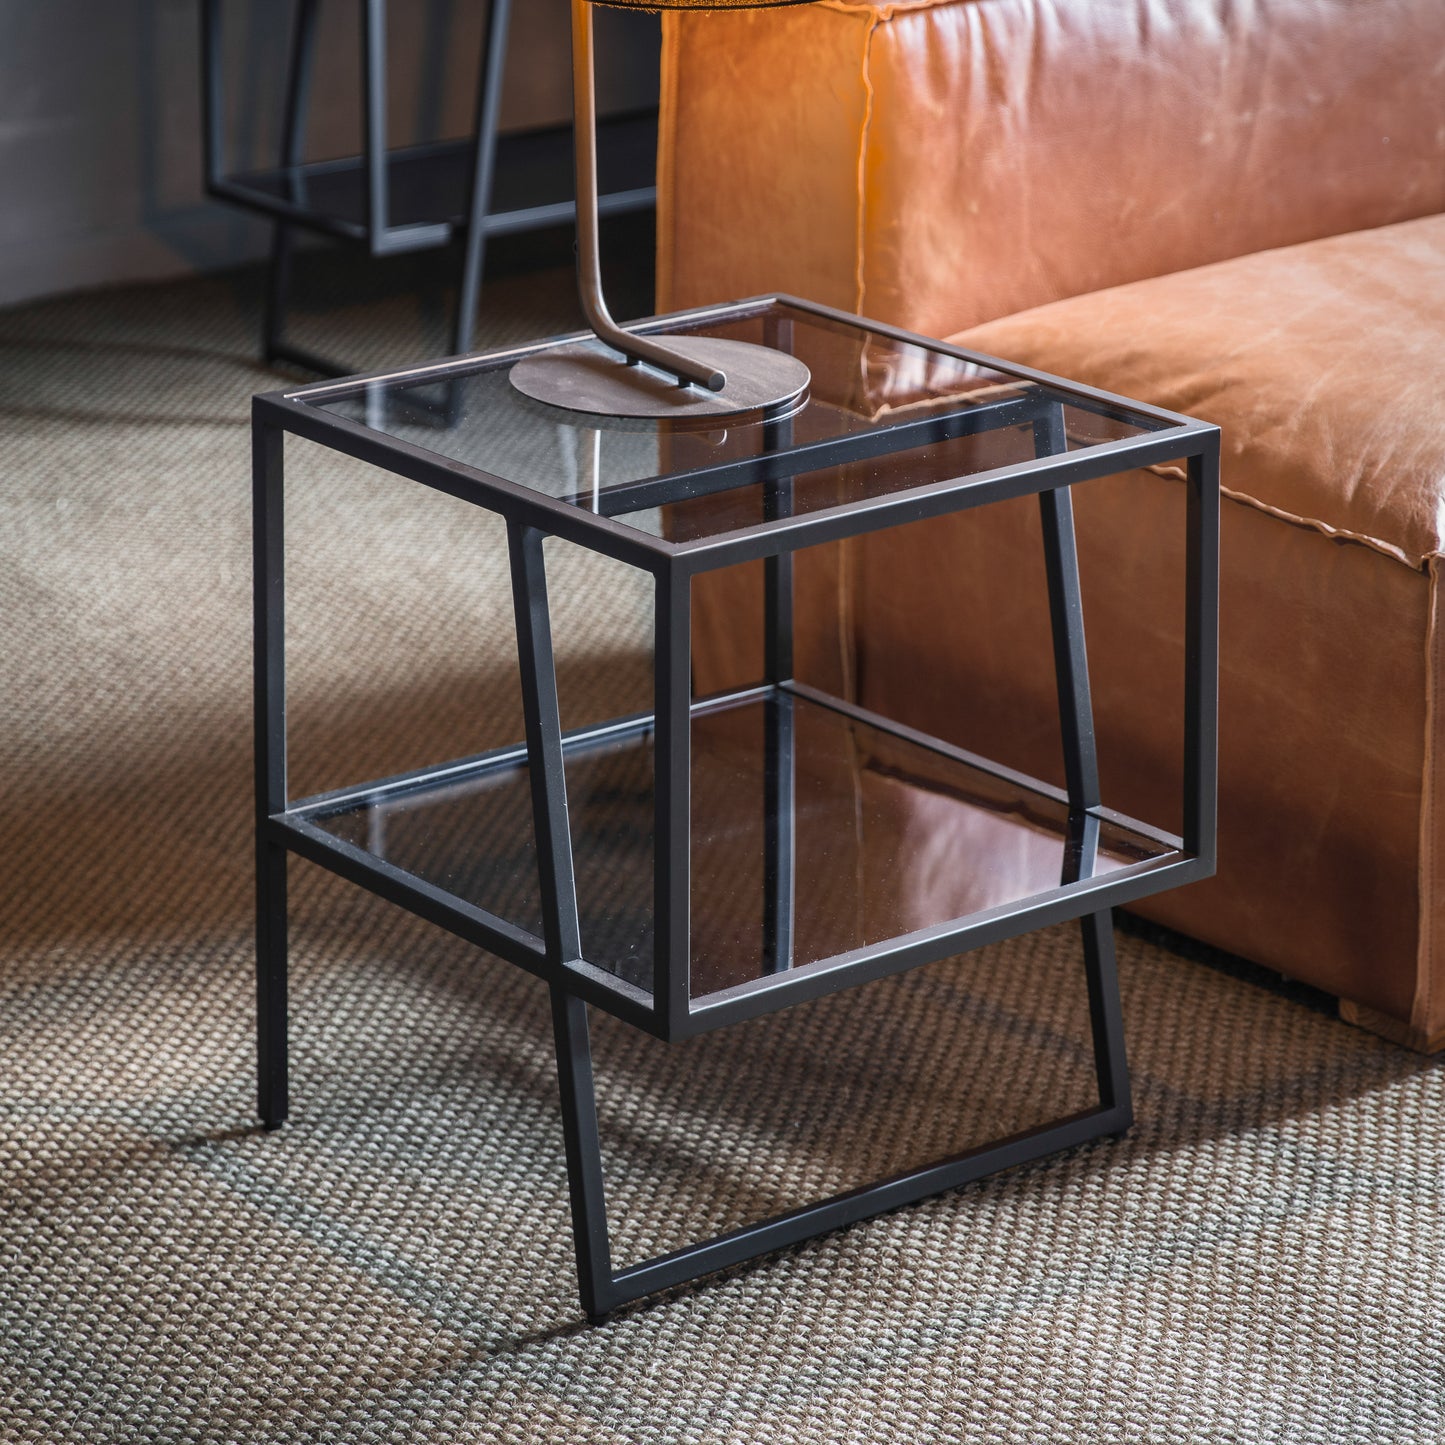 A Putney Side Table with glass top, perfect for interior decor.